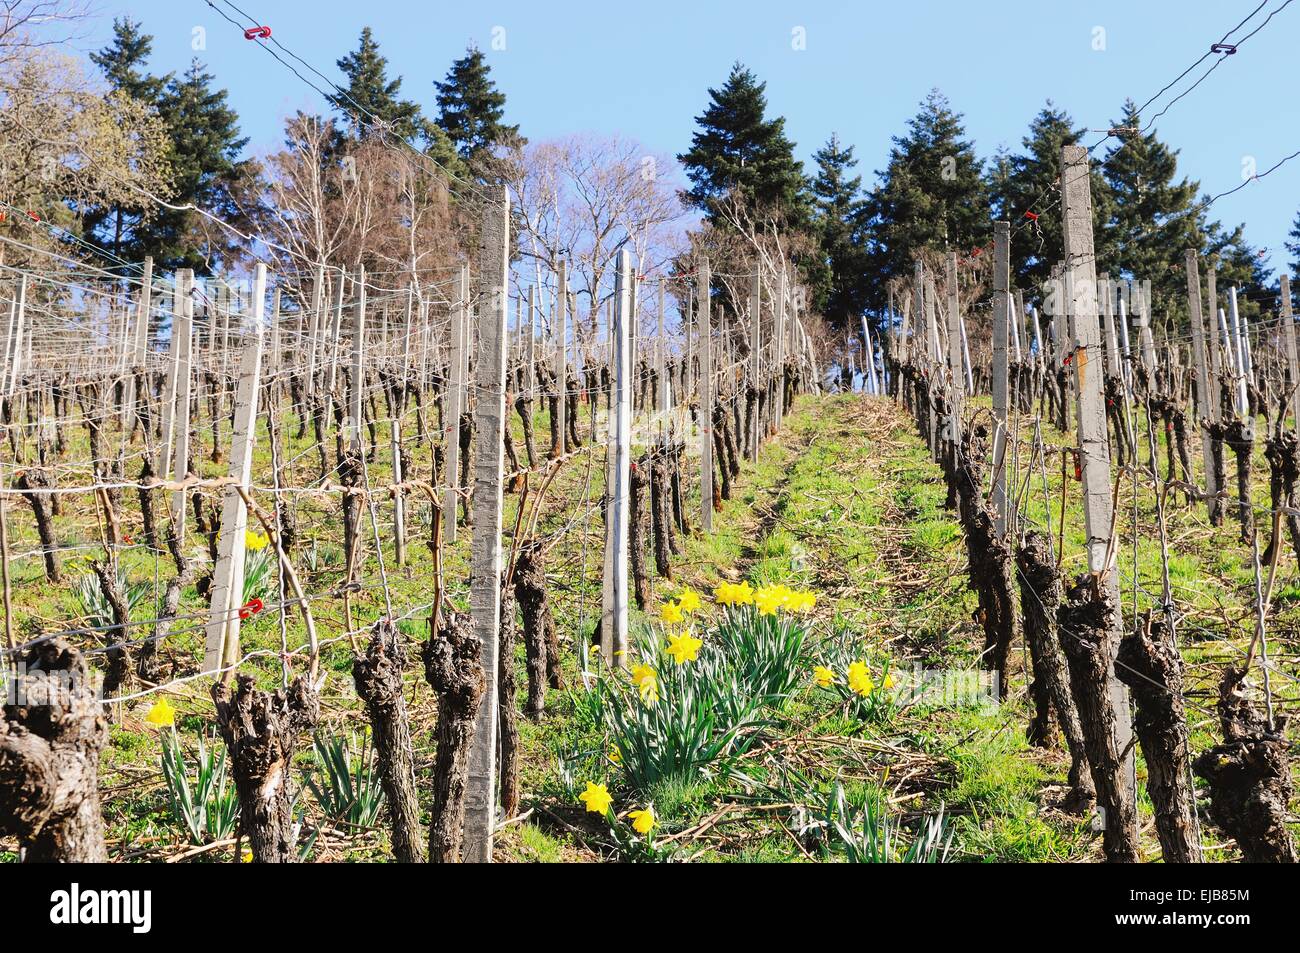 Daffodils in the vines Stock Photo